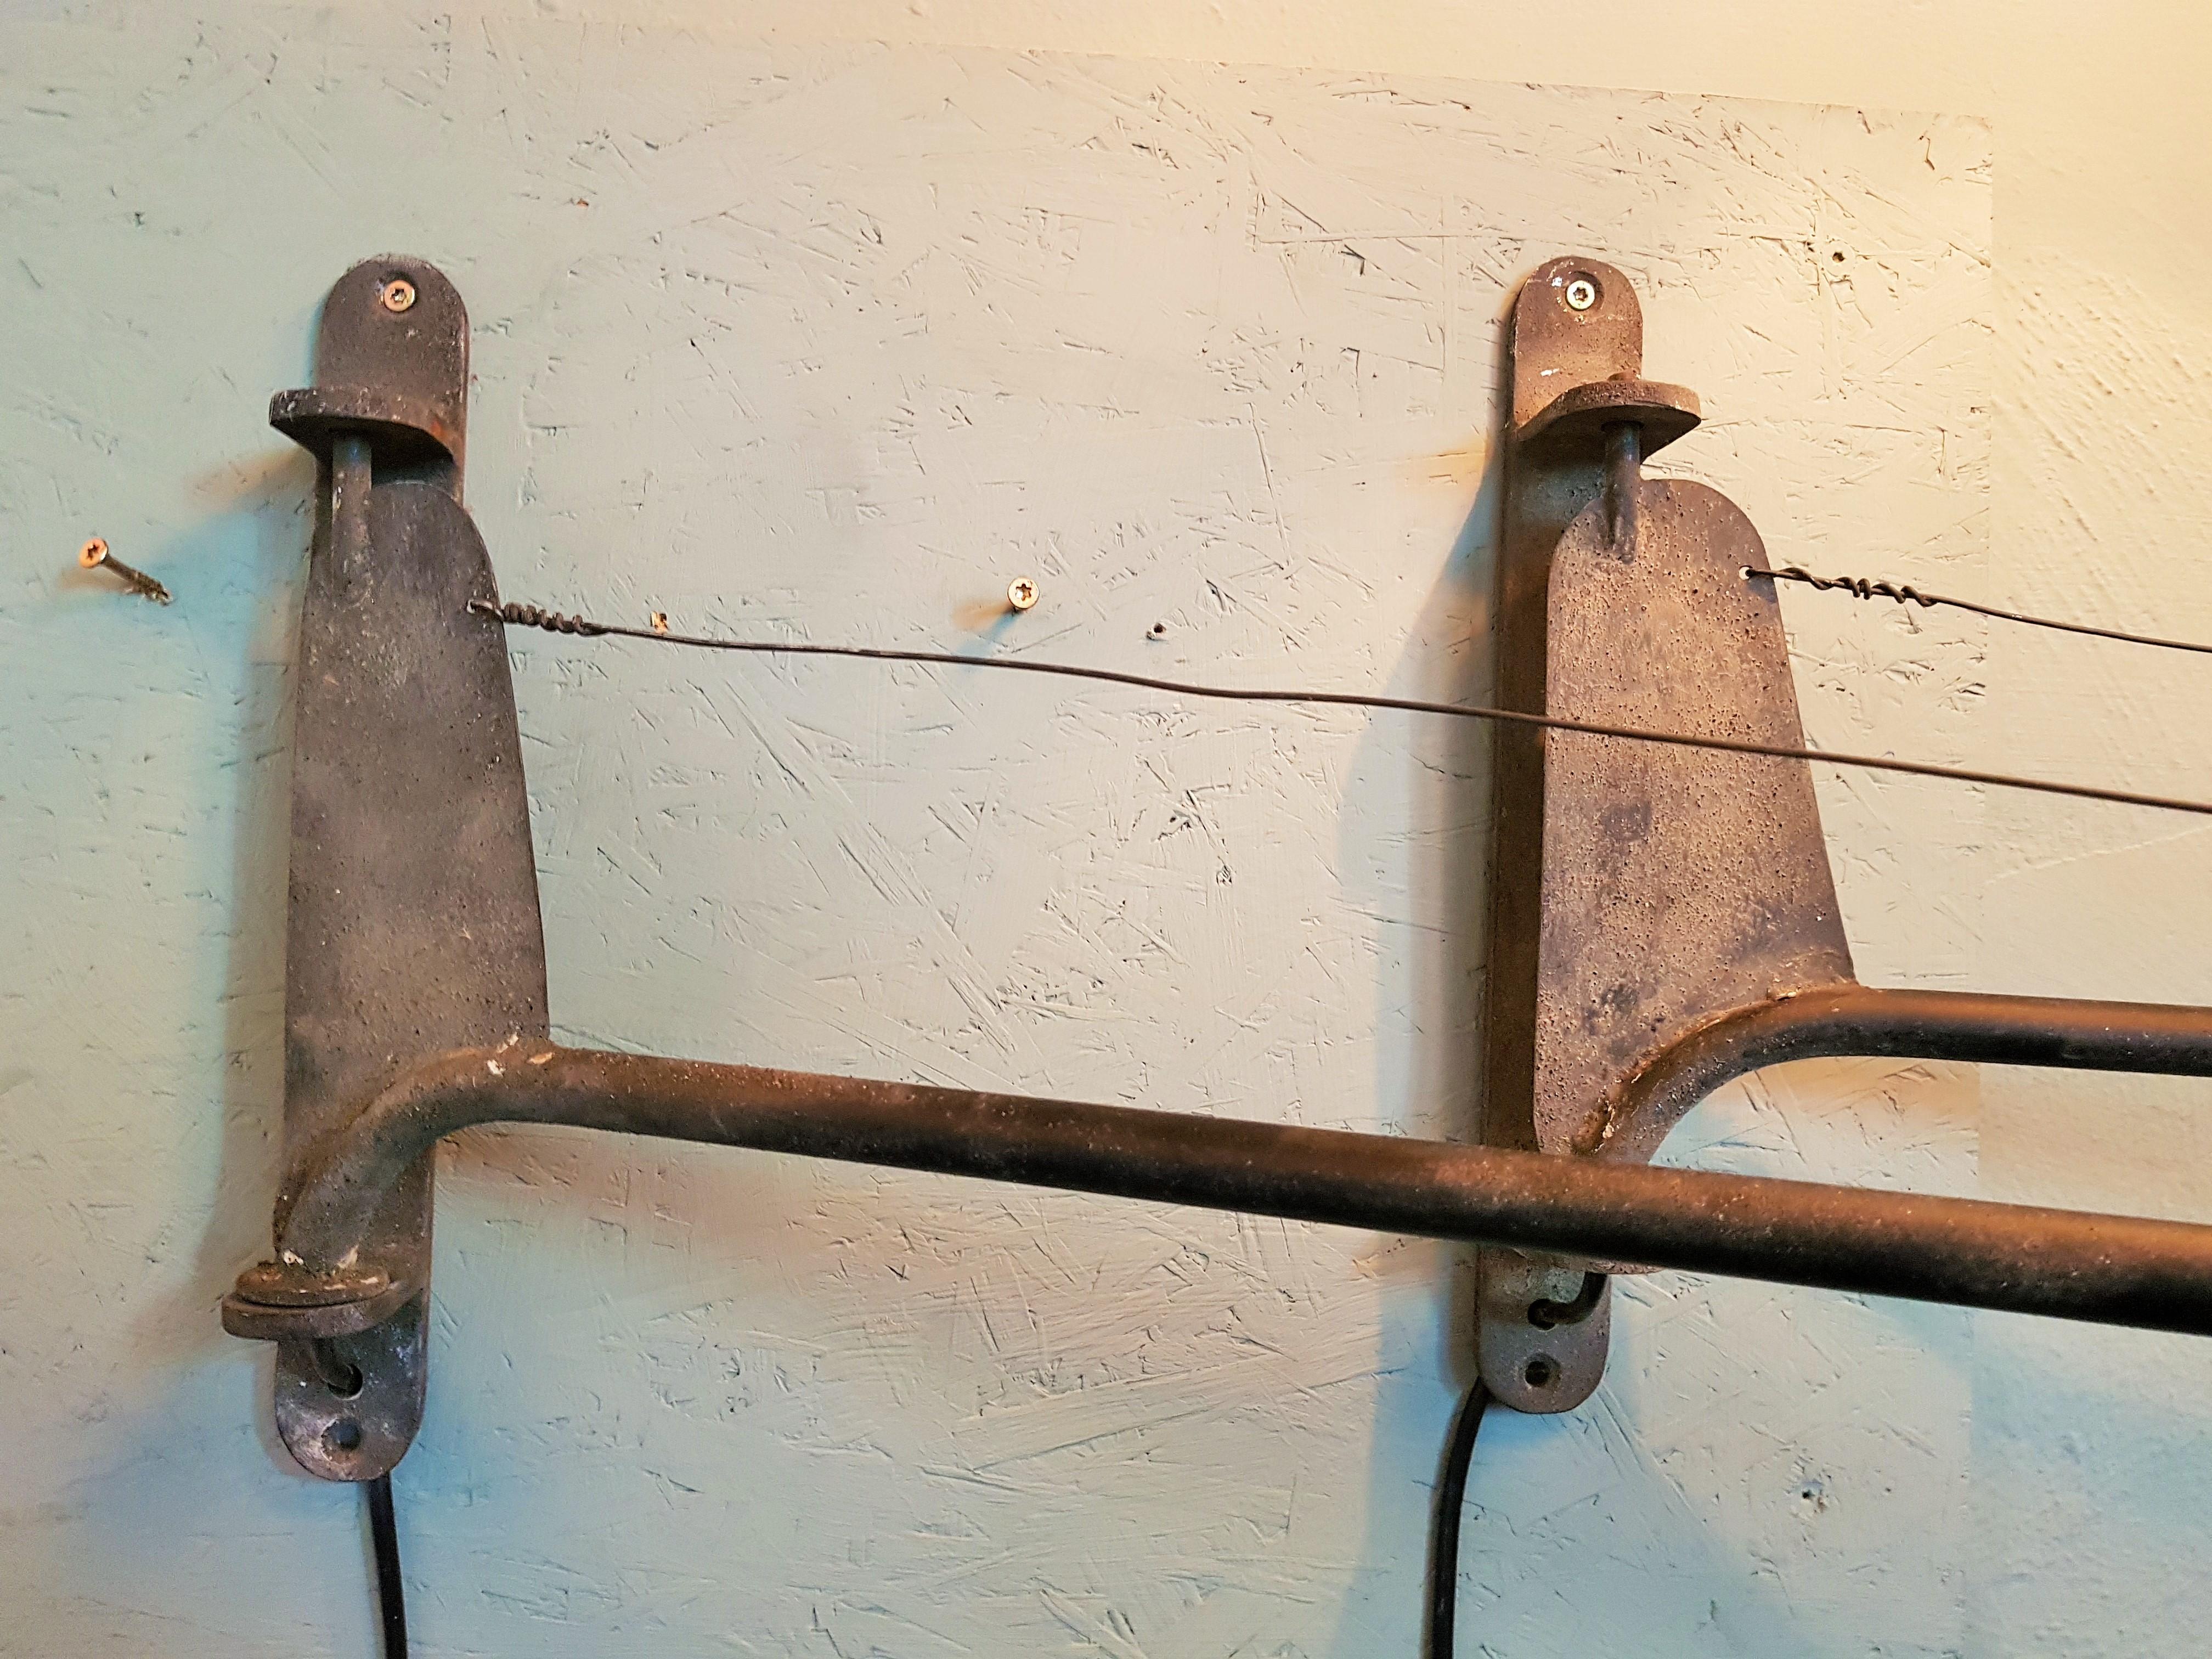 French Midcentury Pair of Prouve Potence Swing Jib Wall Lamps, France 1950s For Sale